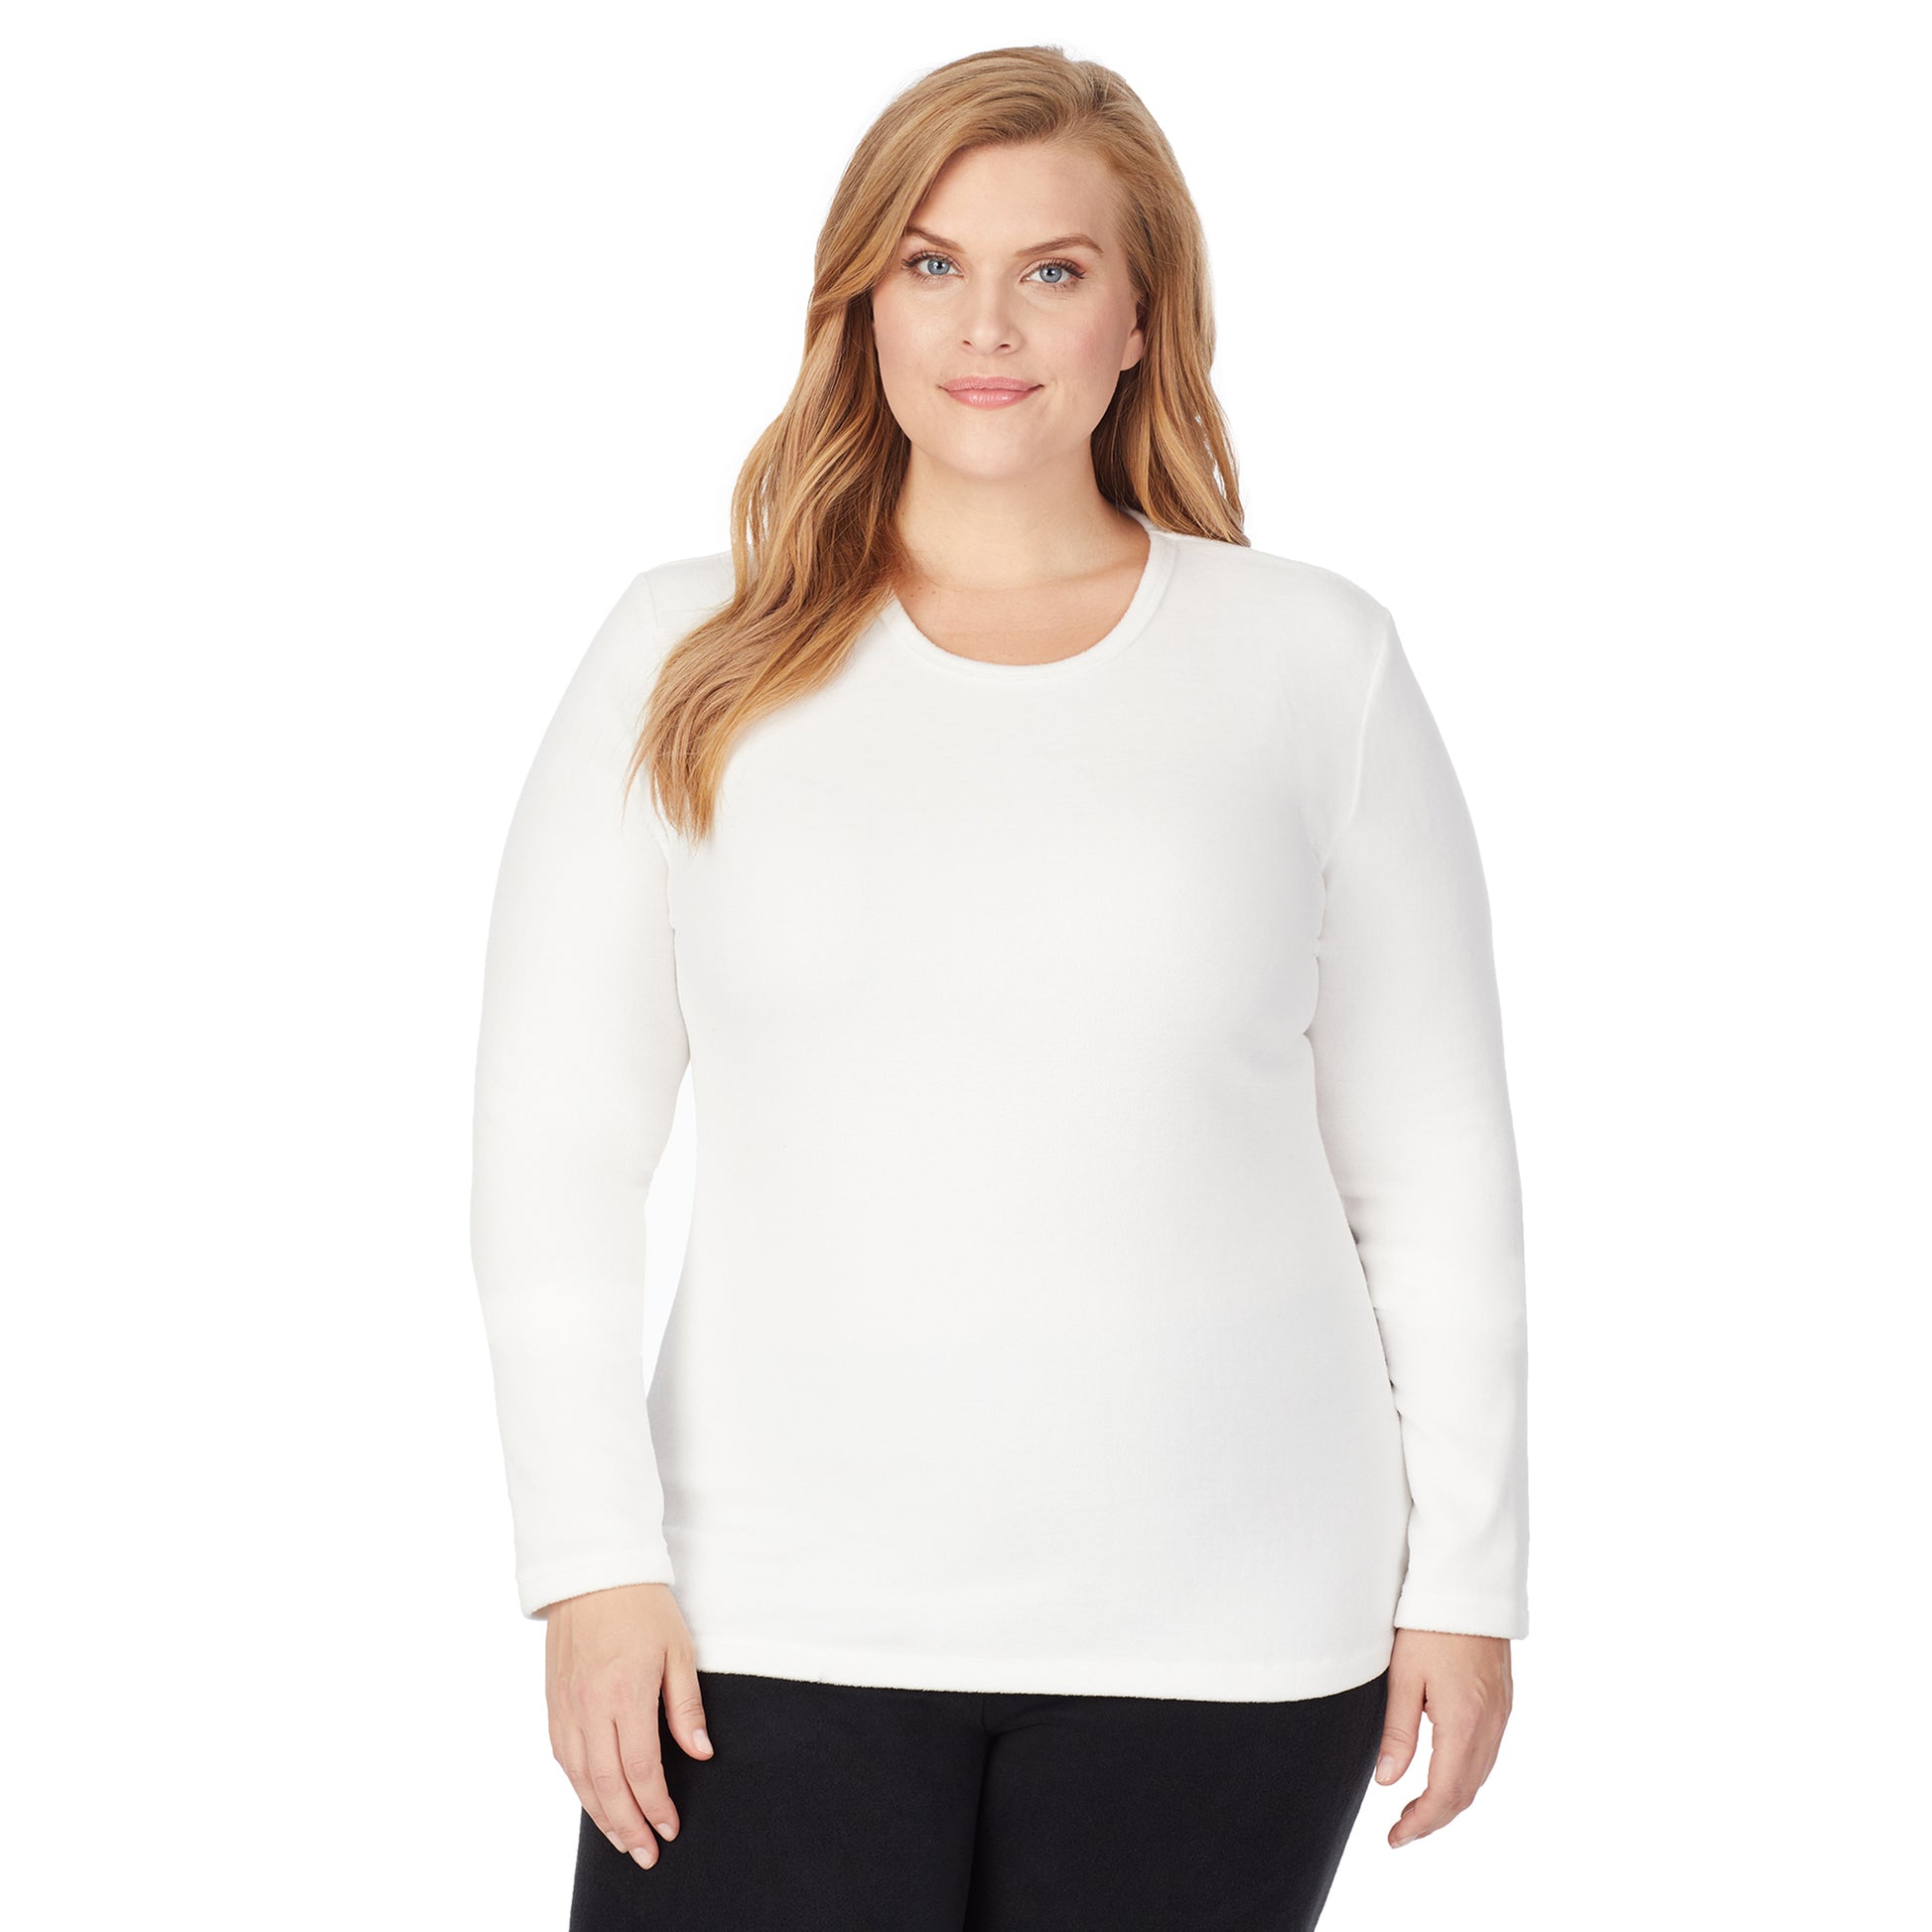 Off White; Model is wearing size 1X. She is 5'9", Bust 38", Waist 36", Hips 48.5".@Upper body of a lady wearing white long sleeve crew